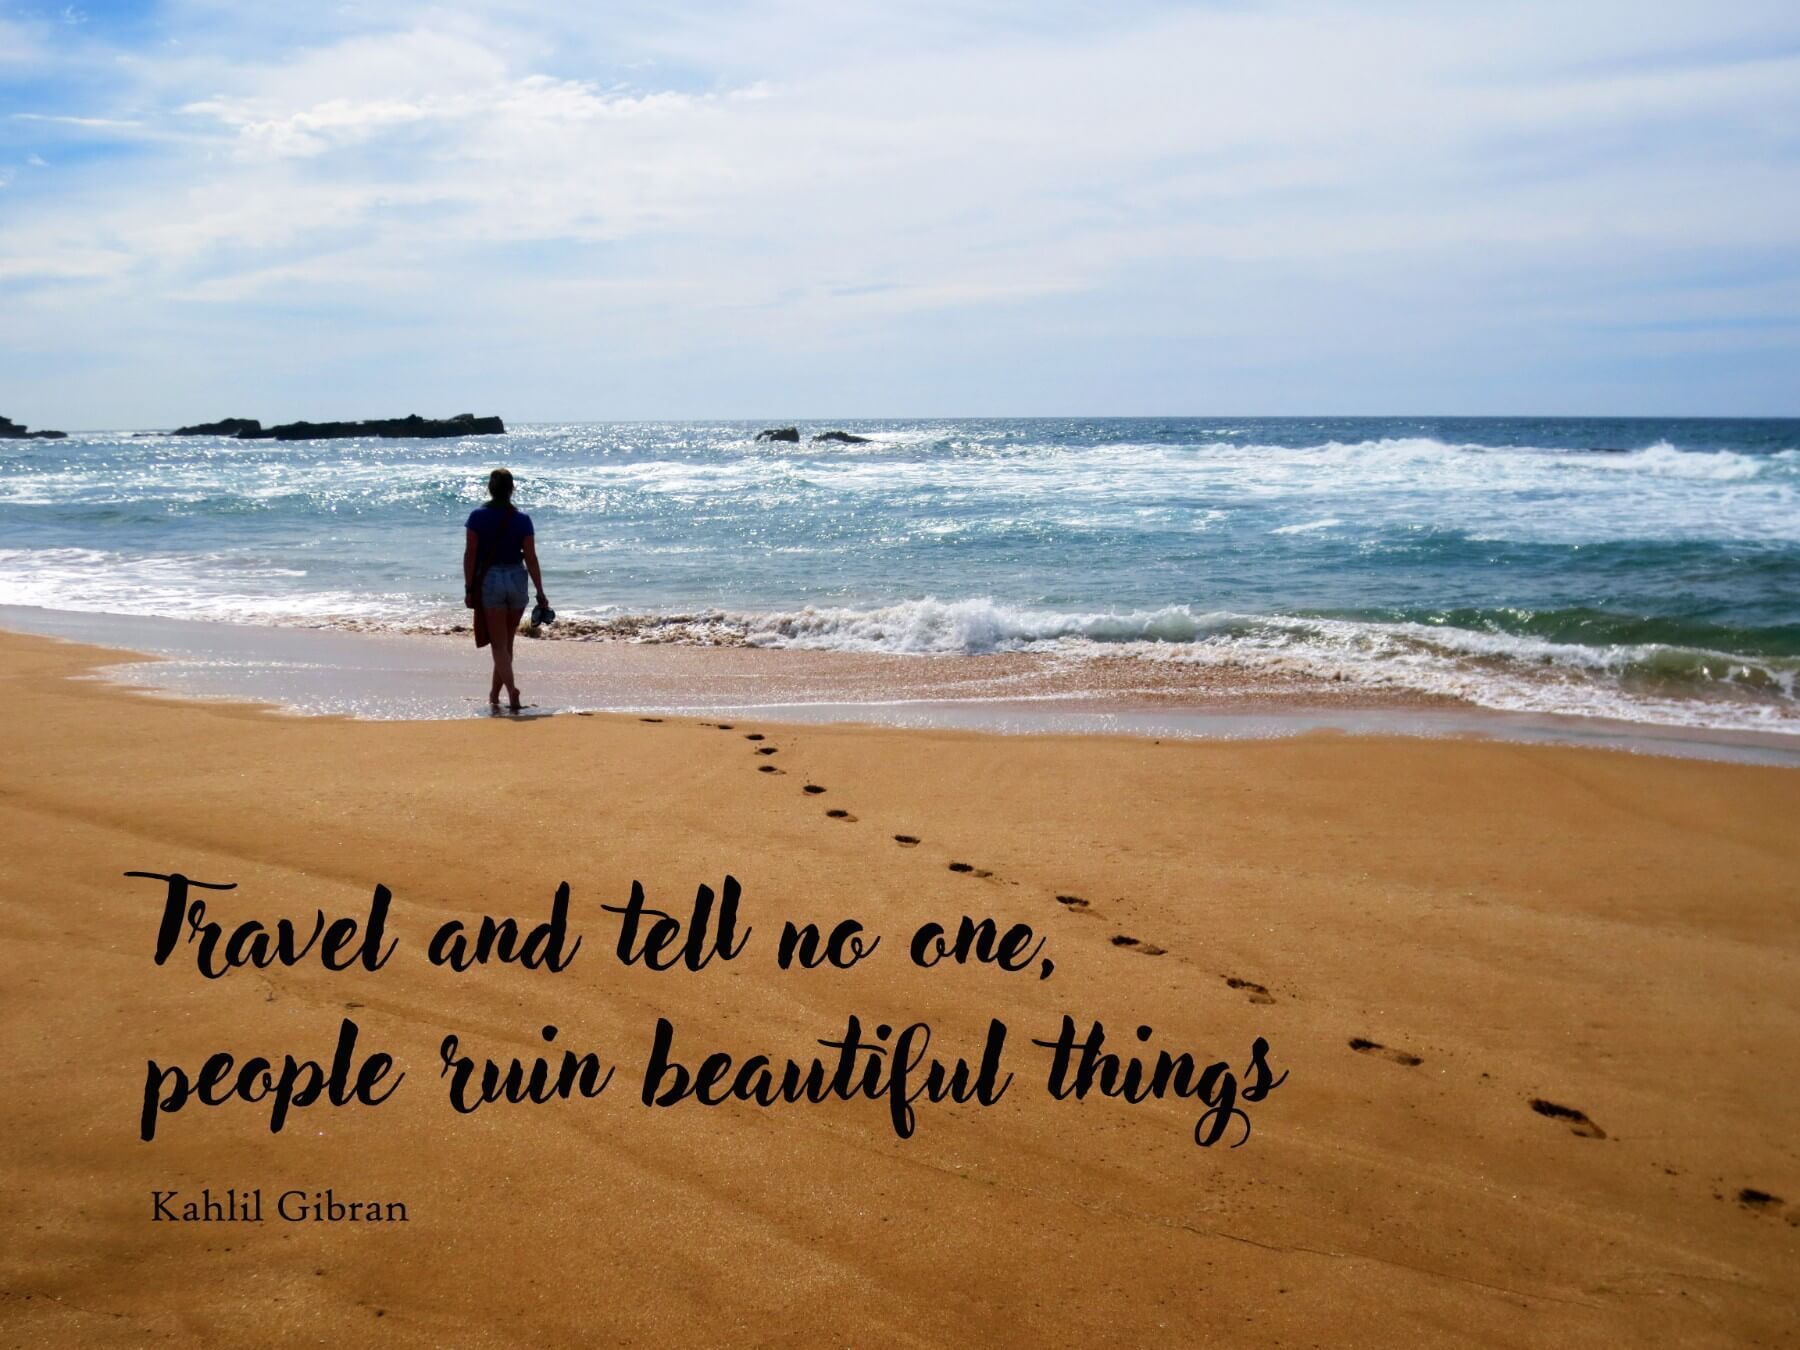 travel and tell no one meaning